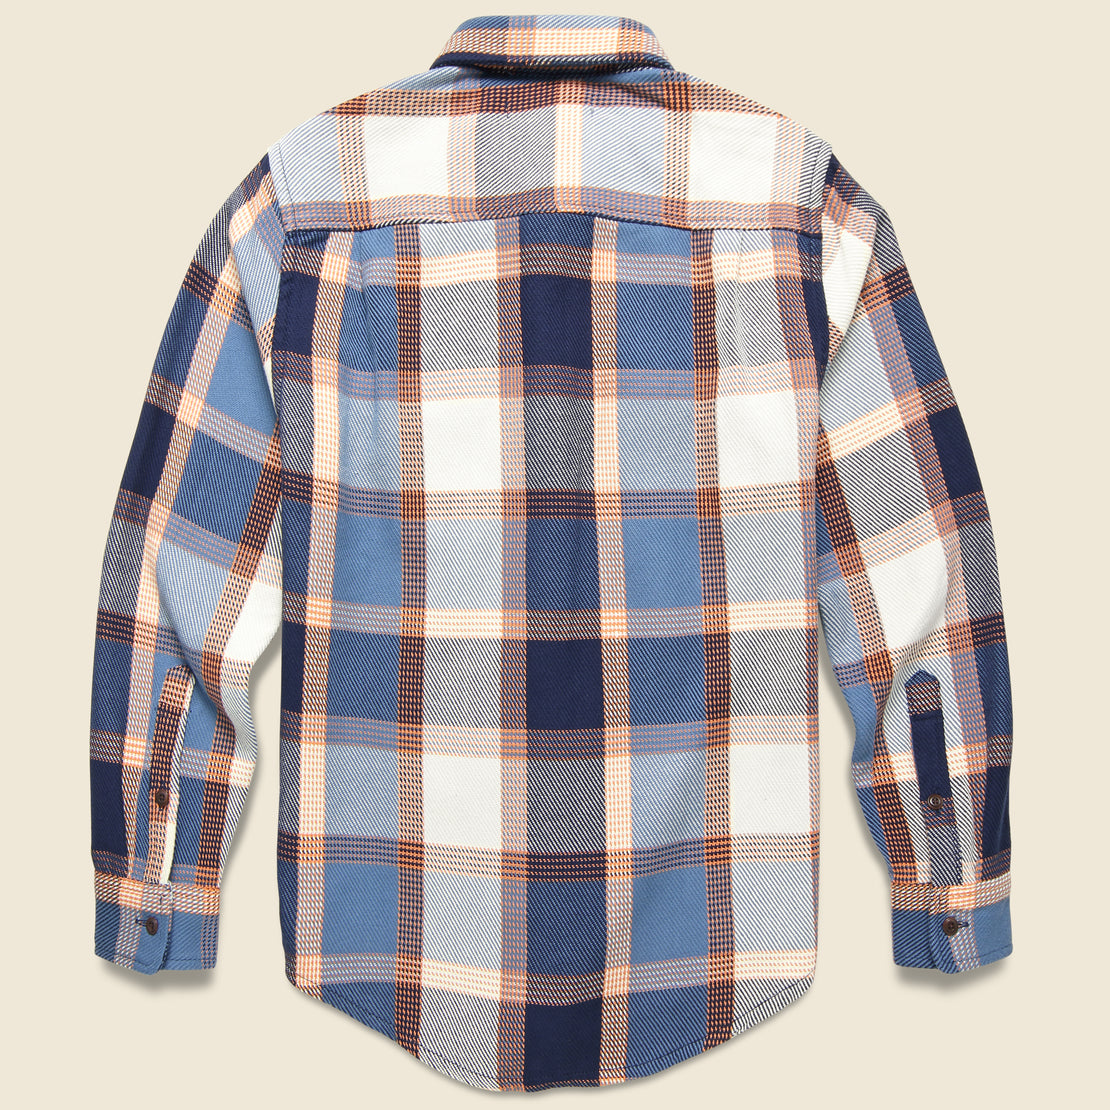 Blanket Shirt - California Street Plaid - Outerknown - STAG Provisions - Tops - L/S Woven - Plaid